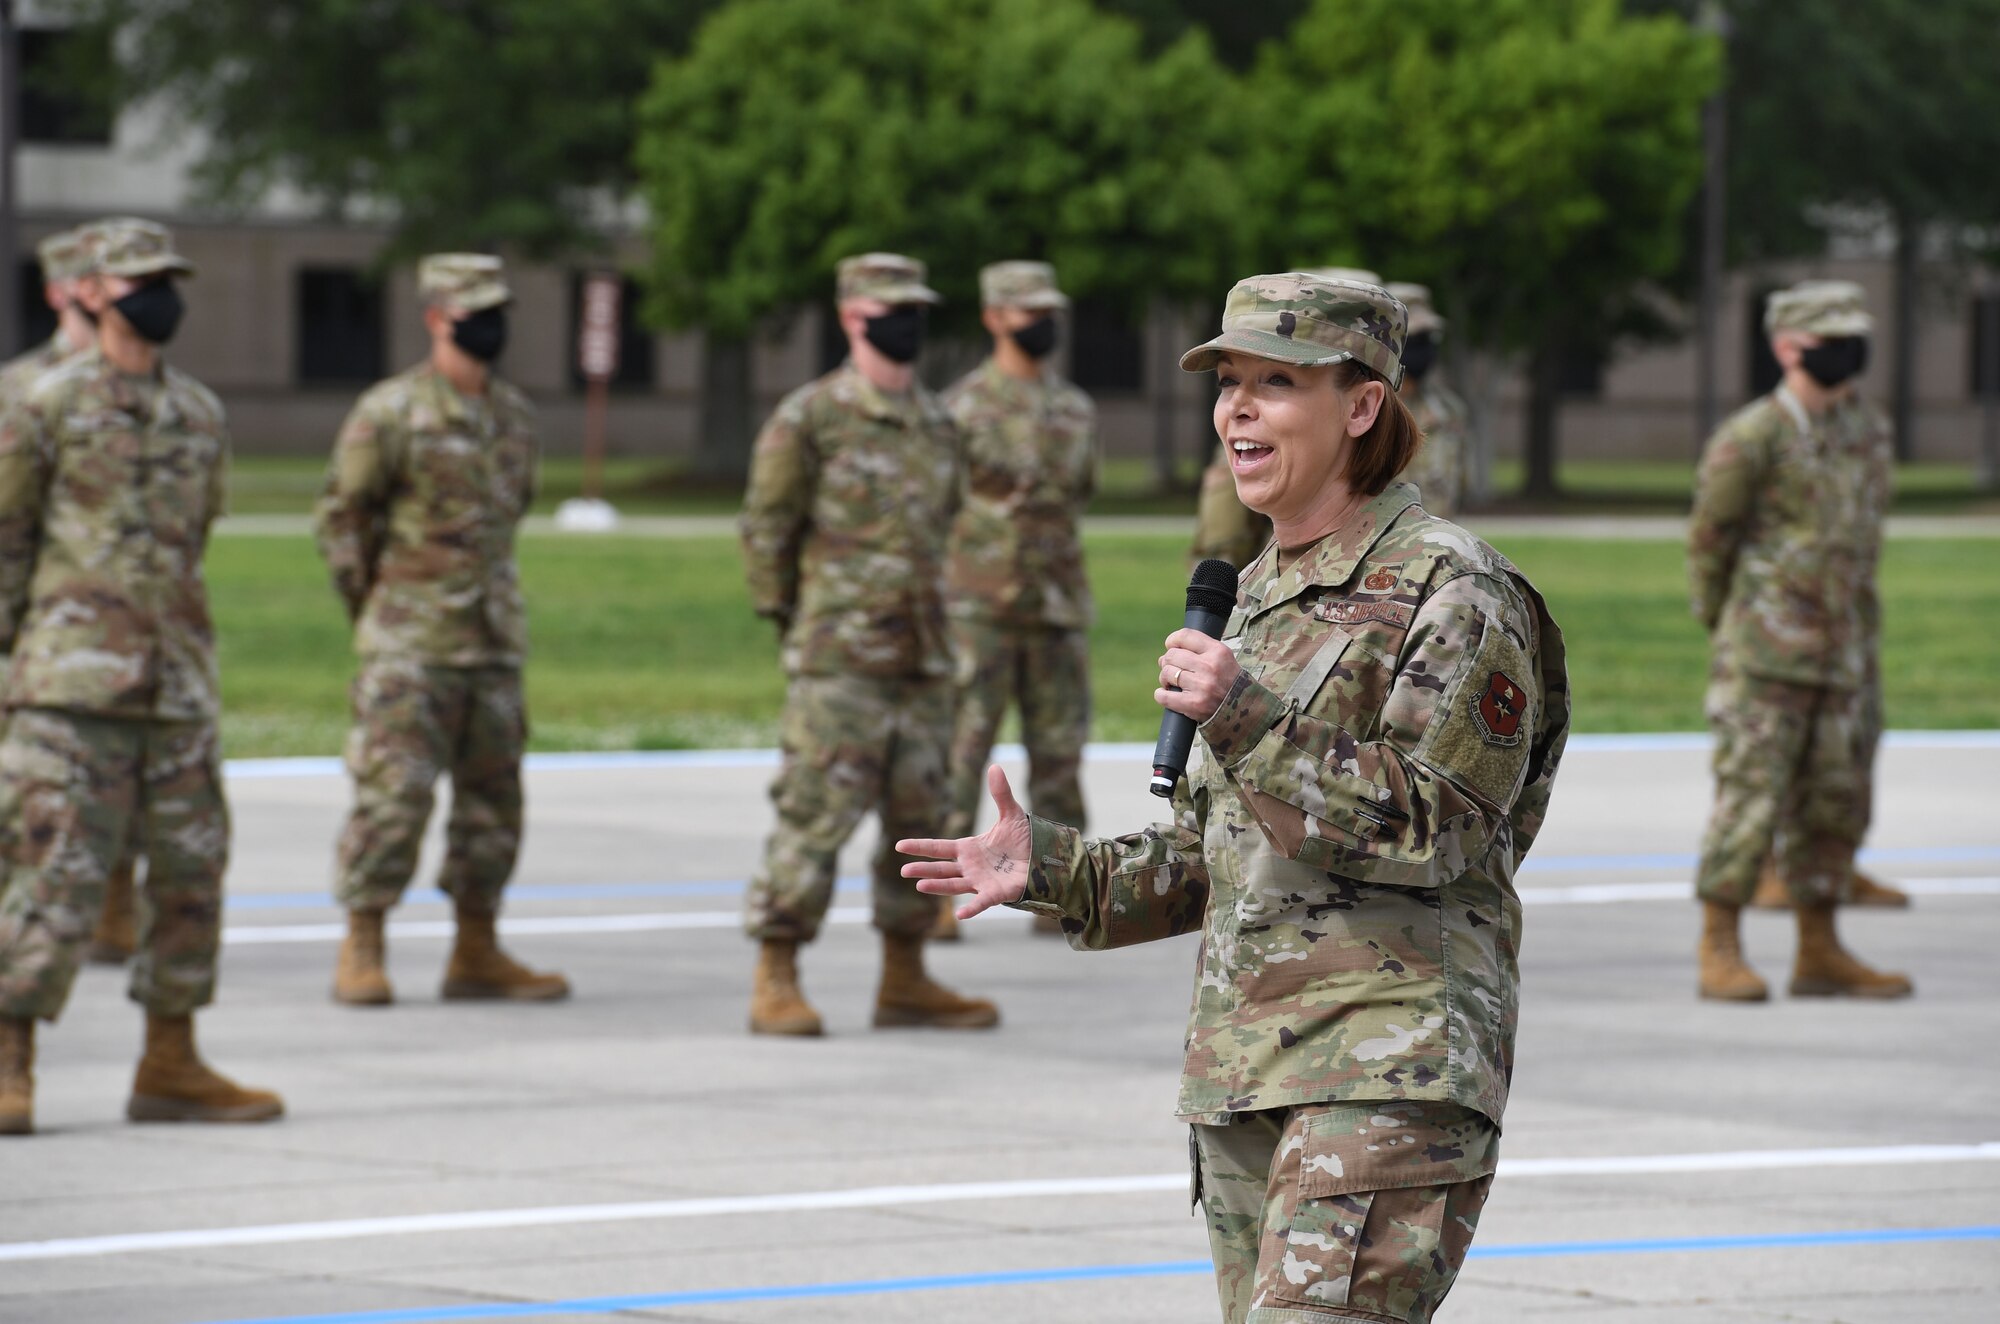 U.S. Air Force Chief Master Sgt. Julie Gudgel, Air Education and Training Command command chief, delivers remarks during the basic military training graduation ceremony at Keesler Air Force Base, Mississippi, May 15, 2020. Nearly 60 Airmen from the 37th Training Wing Detachment 5 completed the six-week basic military training course. Due to safety concerns stemming from COVID-19, the Air Force sent new recruits to Keesler to demonstrate a proof of concept to generate the force at multiple locations during contingencies. The flight was the first to graduate BMT at Keesler since 1968. (U.S. Air Force photo by Kemberly Groue)